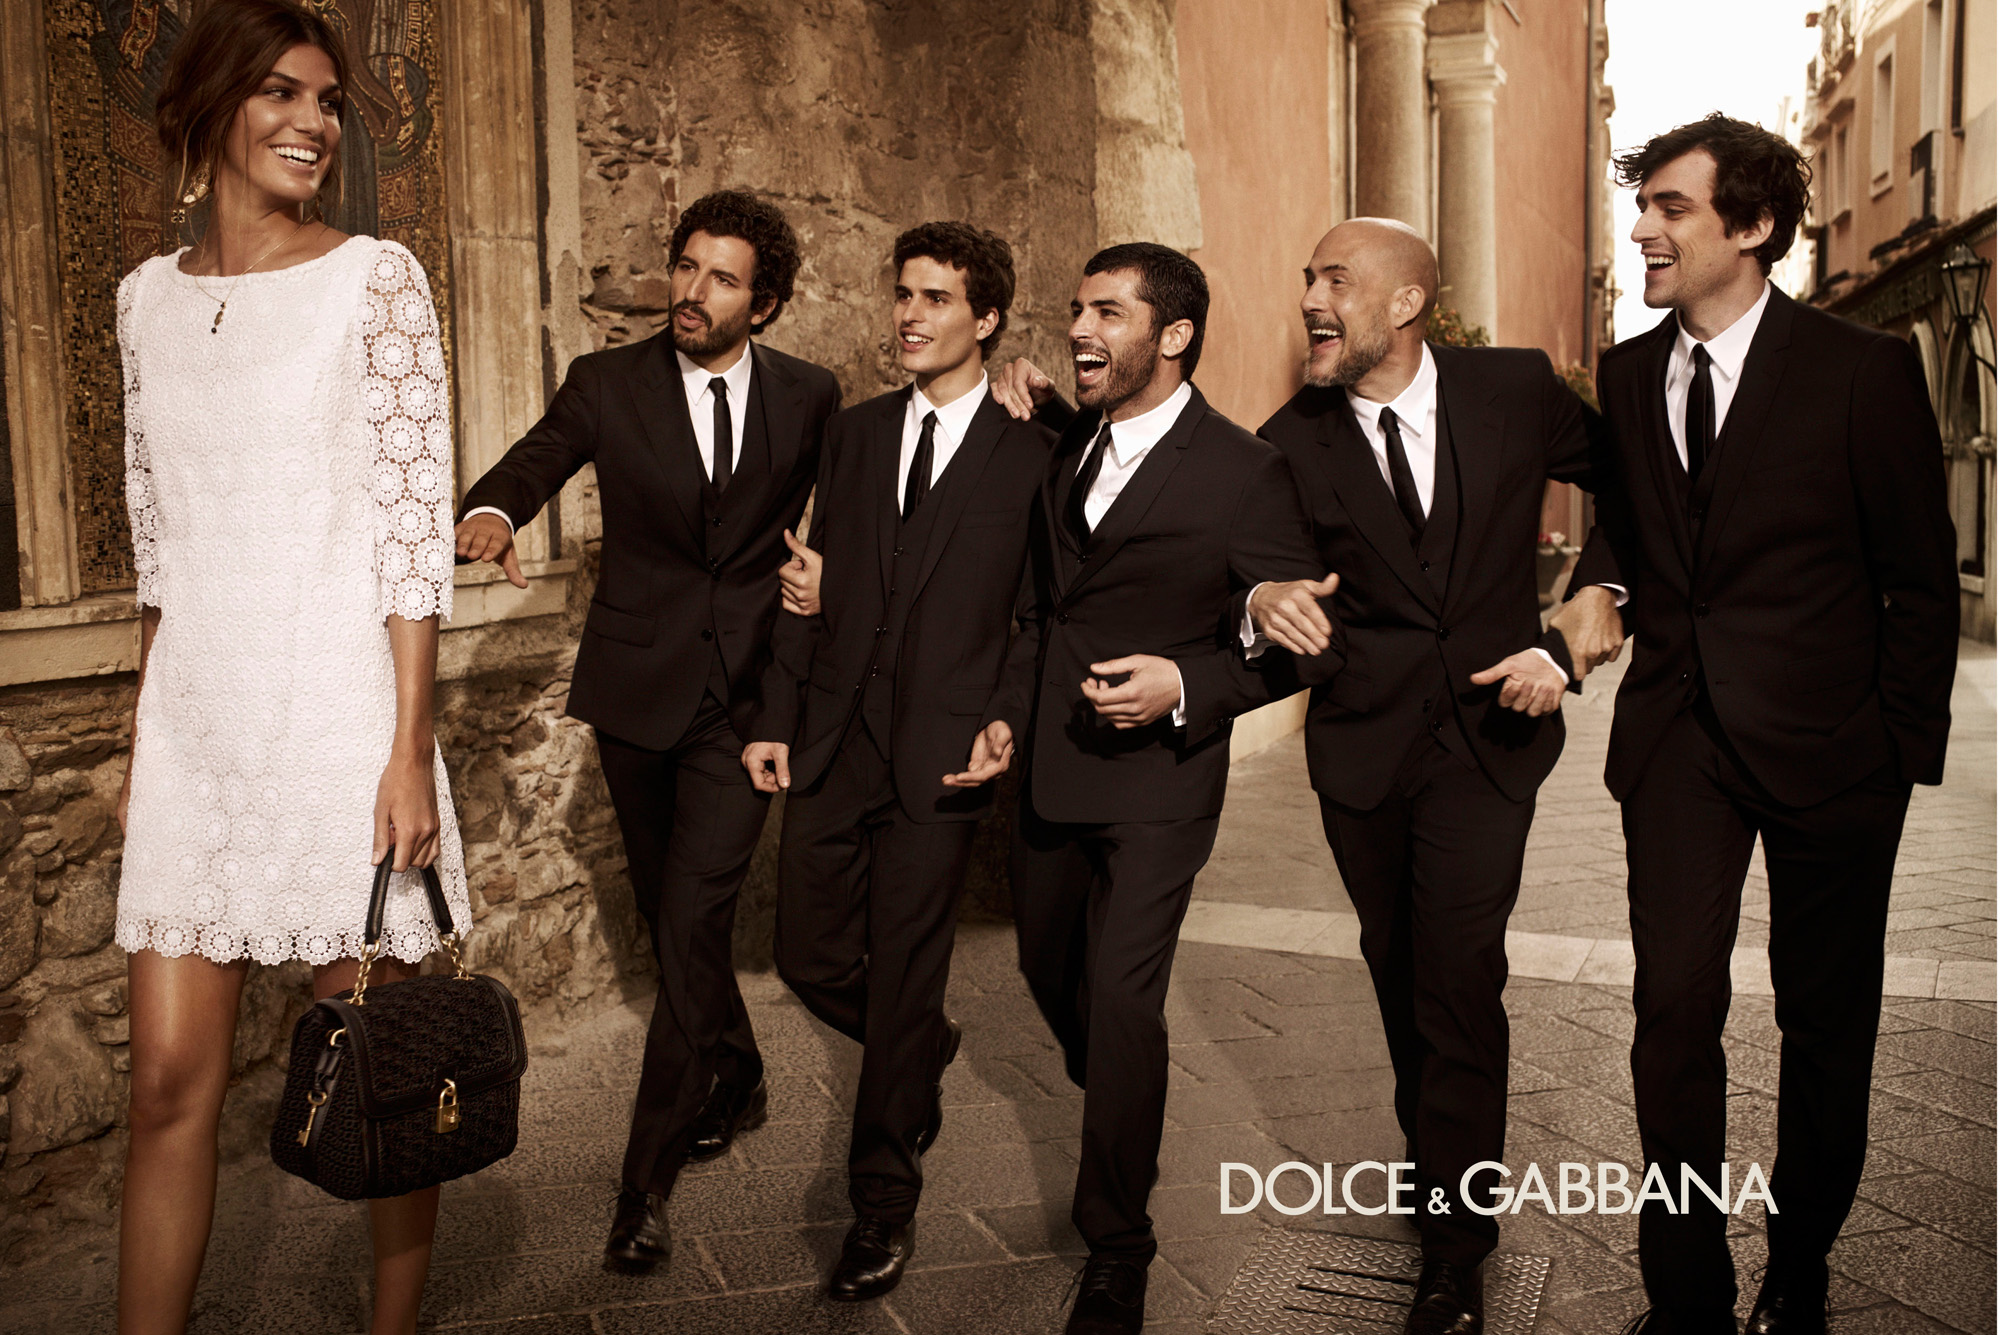 Images of Dolce & Gabbana | 2000x1335